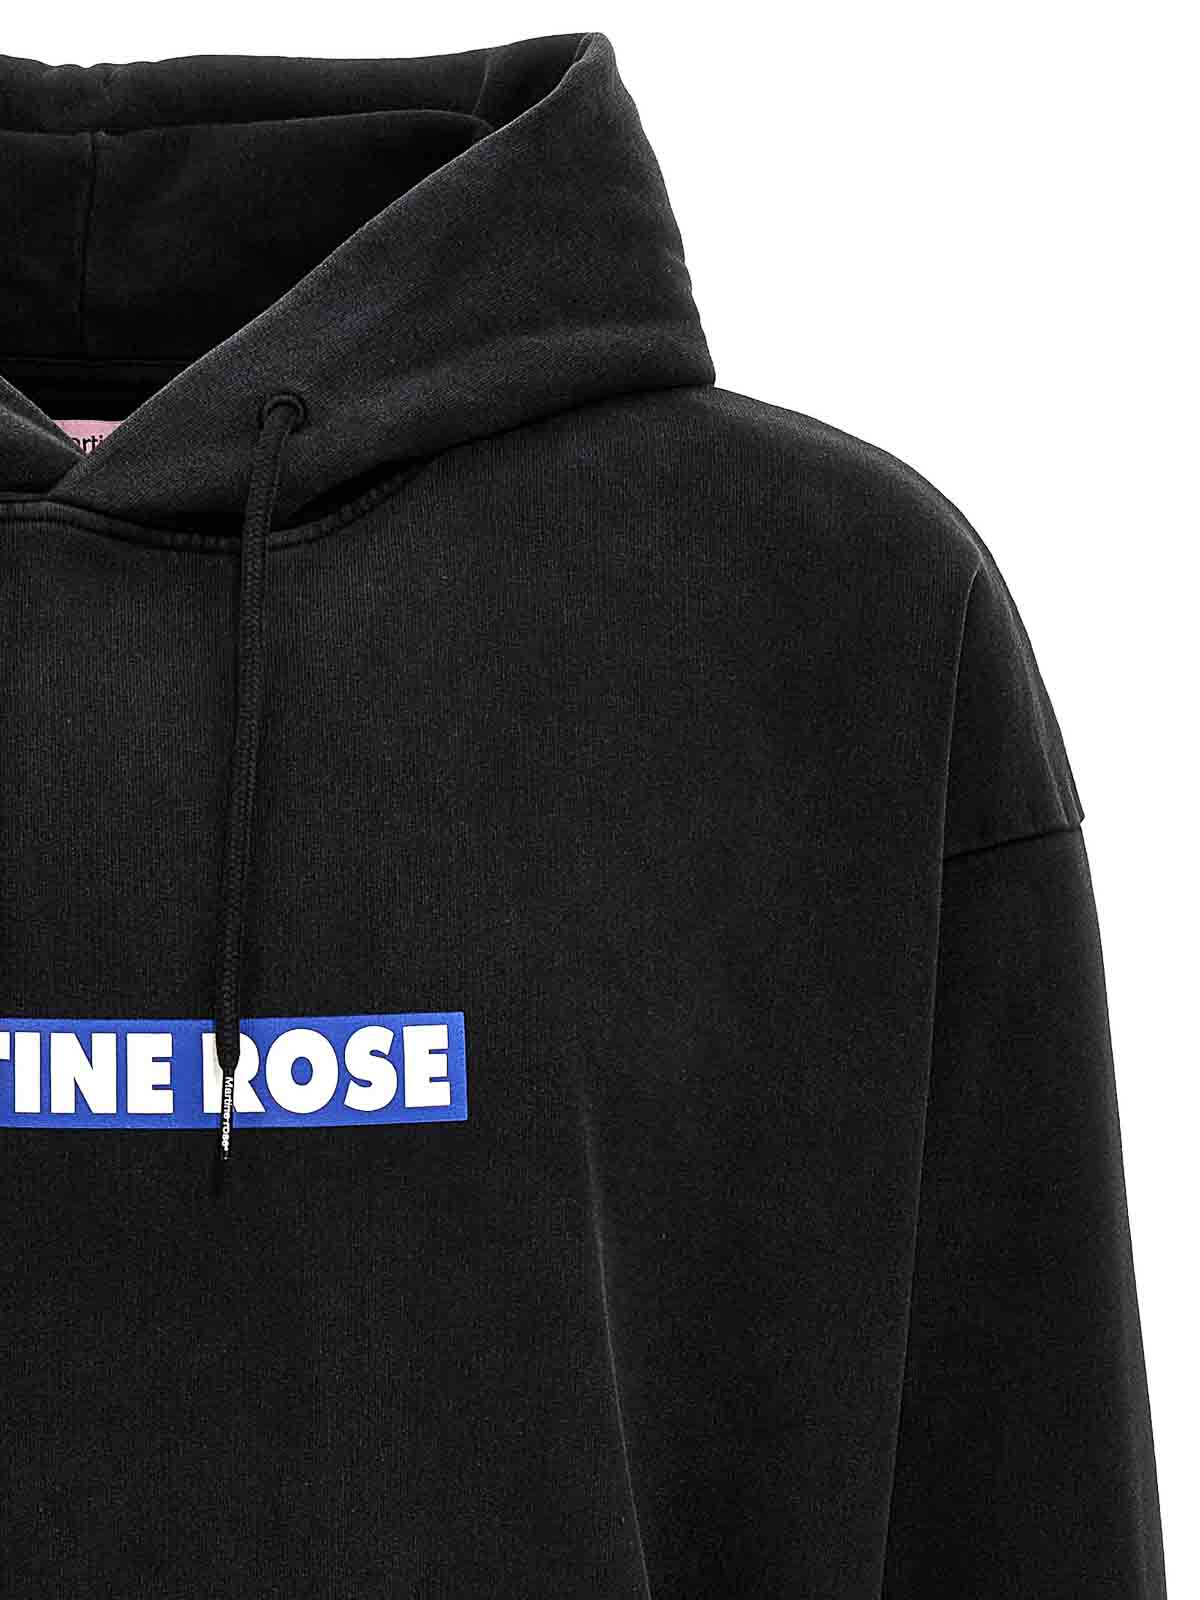 Shop Martine Rose Blow Your Mind Hoodie In Negro